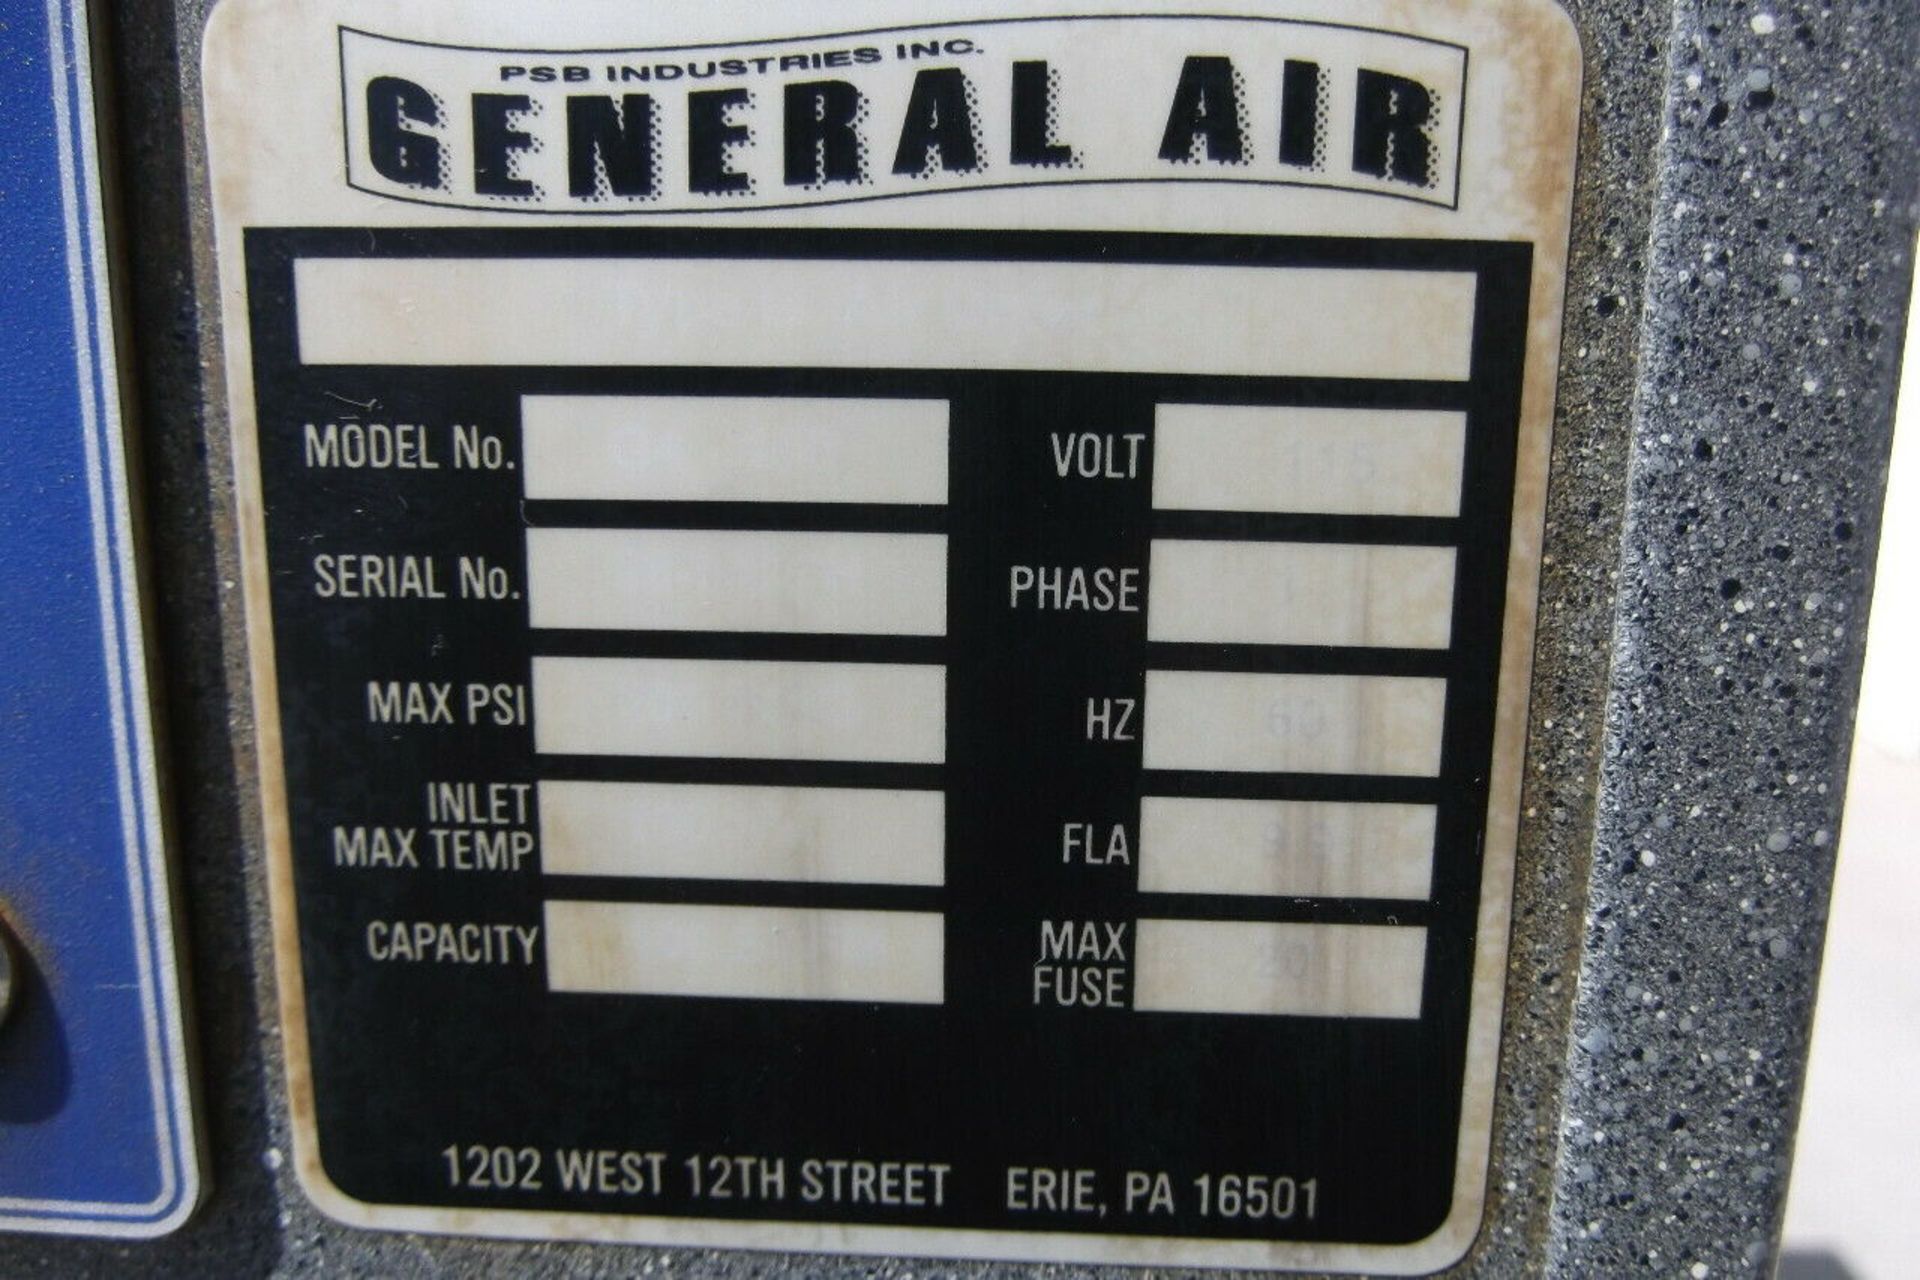 PSB Industries Four Star General Air Dryer 115V 1Phase - Image 6 of 6